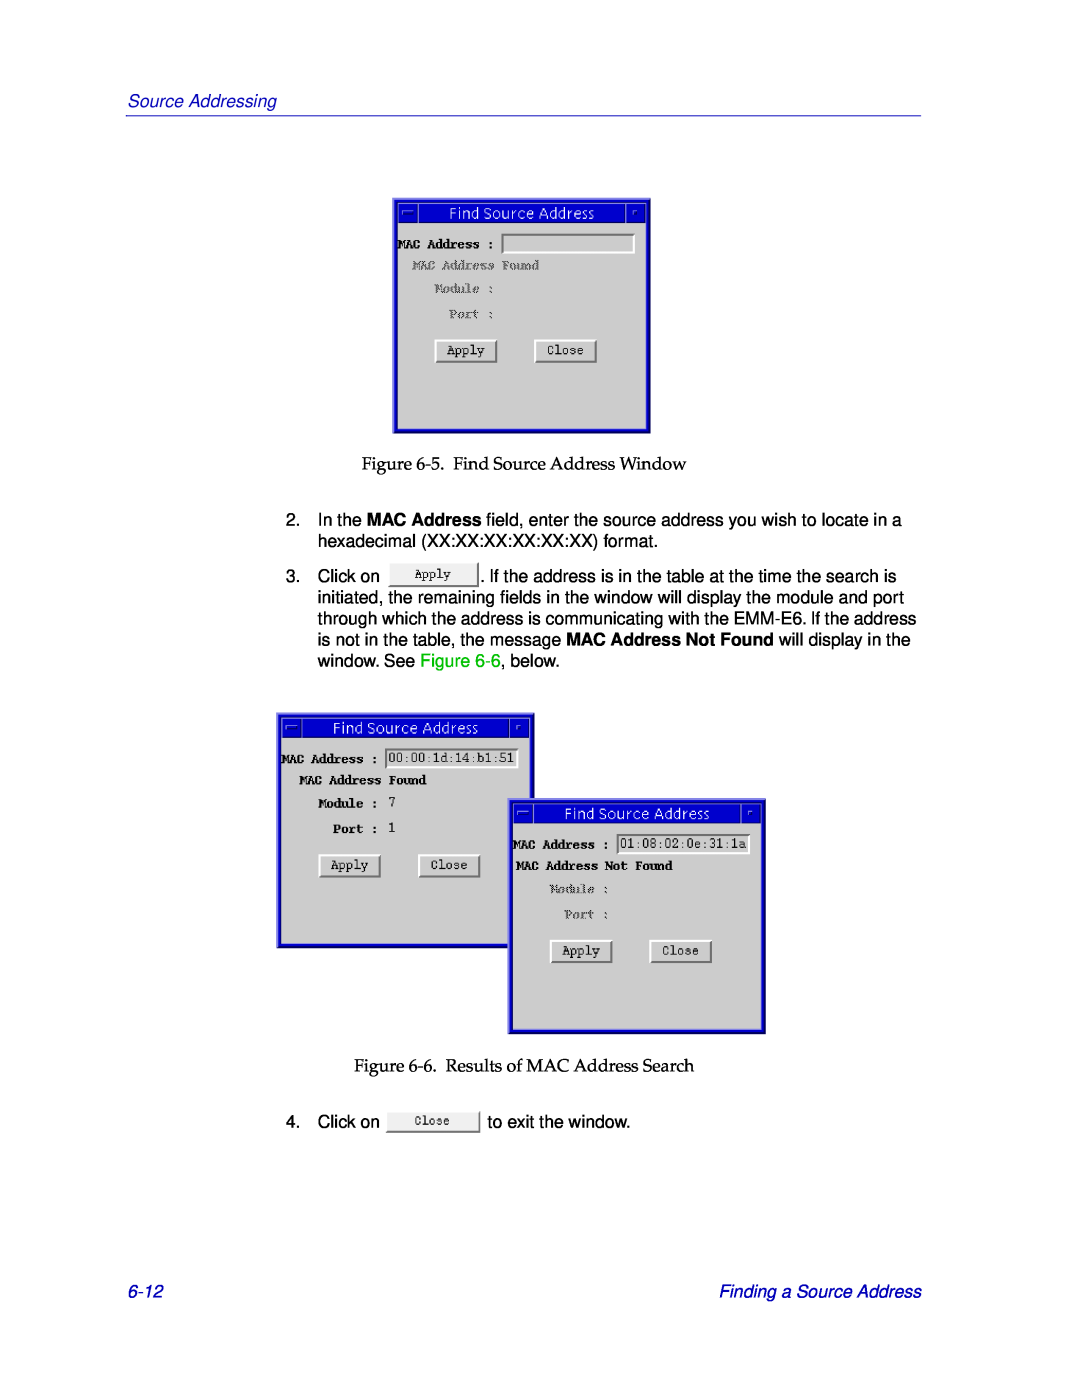 Cabletron Systems EMM-E6 manual 6-12, Source Addressing, 5. Find Source Address Window, 6. Results of MAC Address Search 